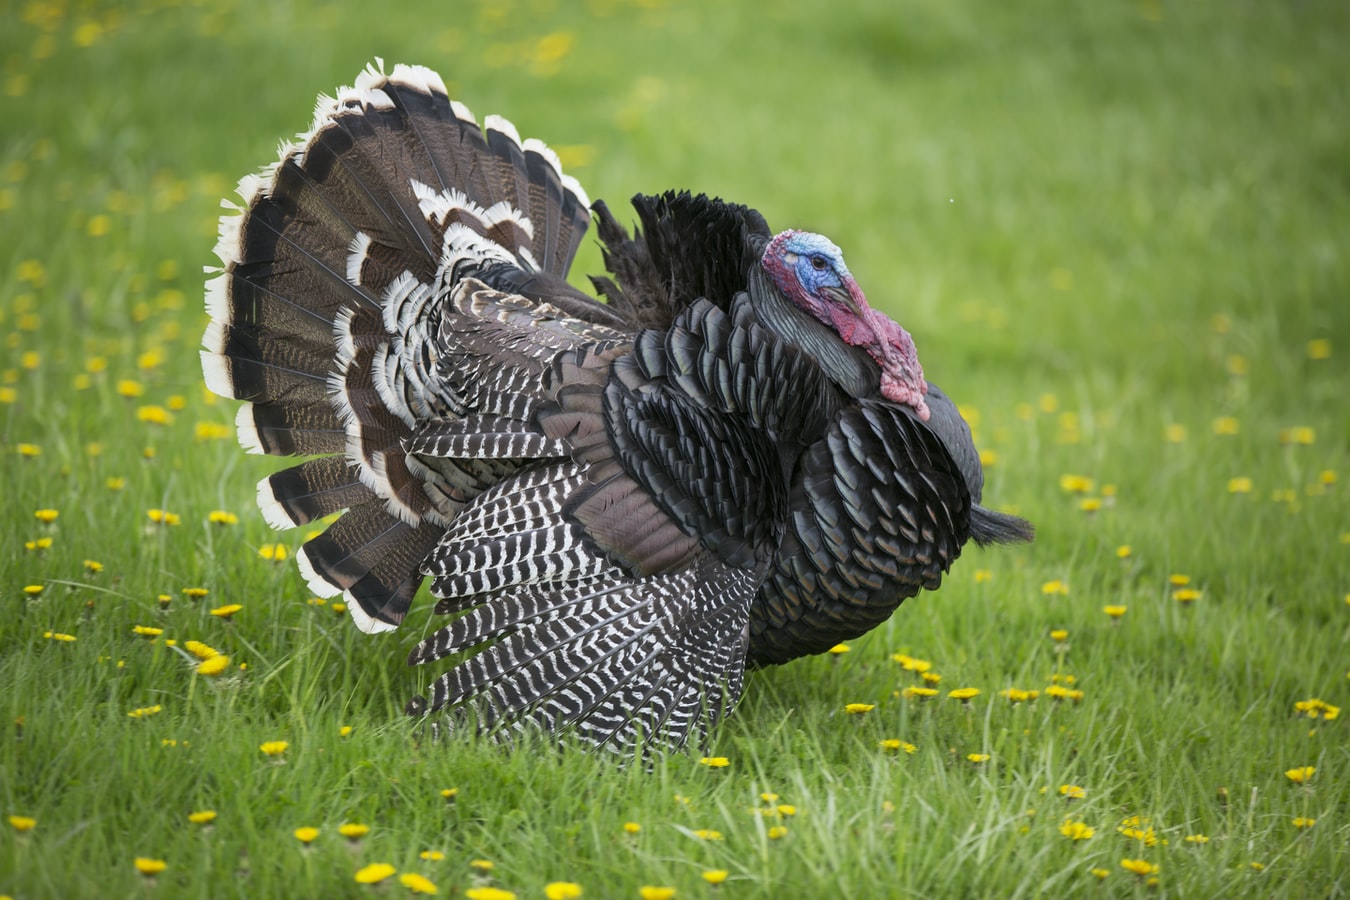 A turkey. The process of quitting substances abrubtly is called quitting cold turkey.